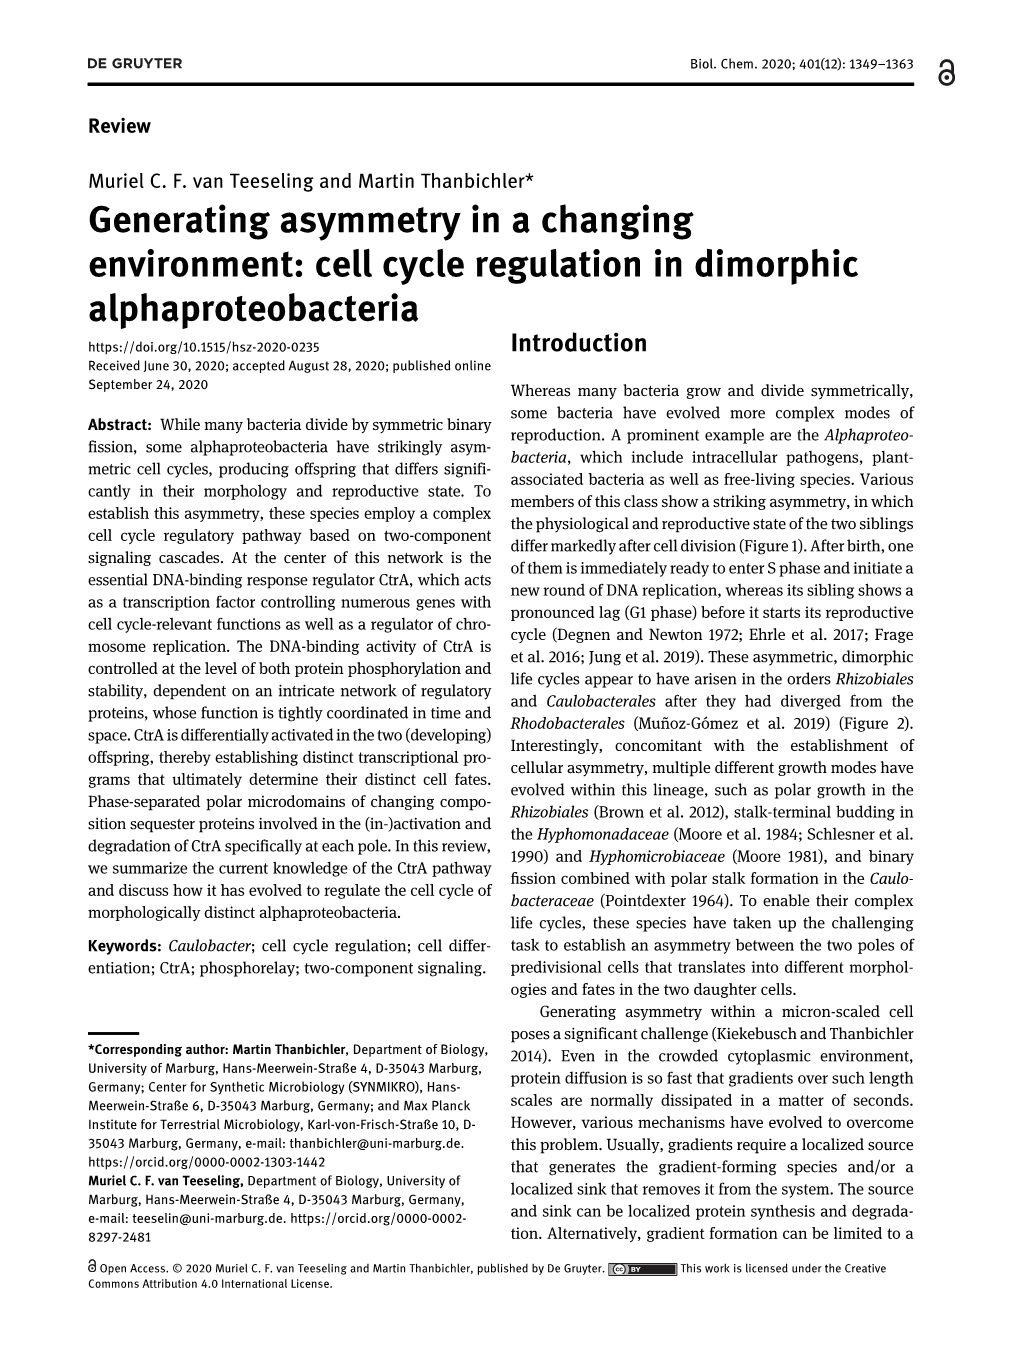 Generating Asymmetry in a Changing Environment: Cell Cycle Regulation In